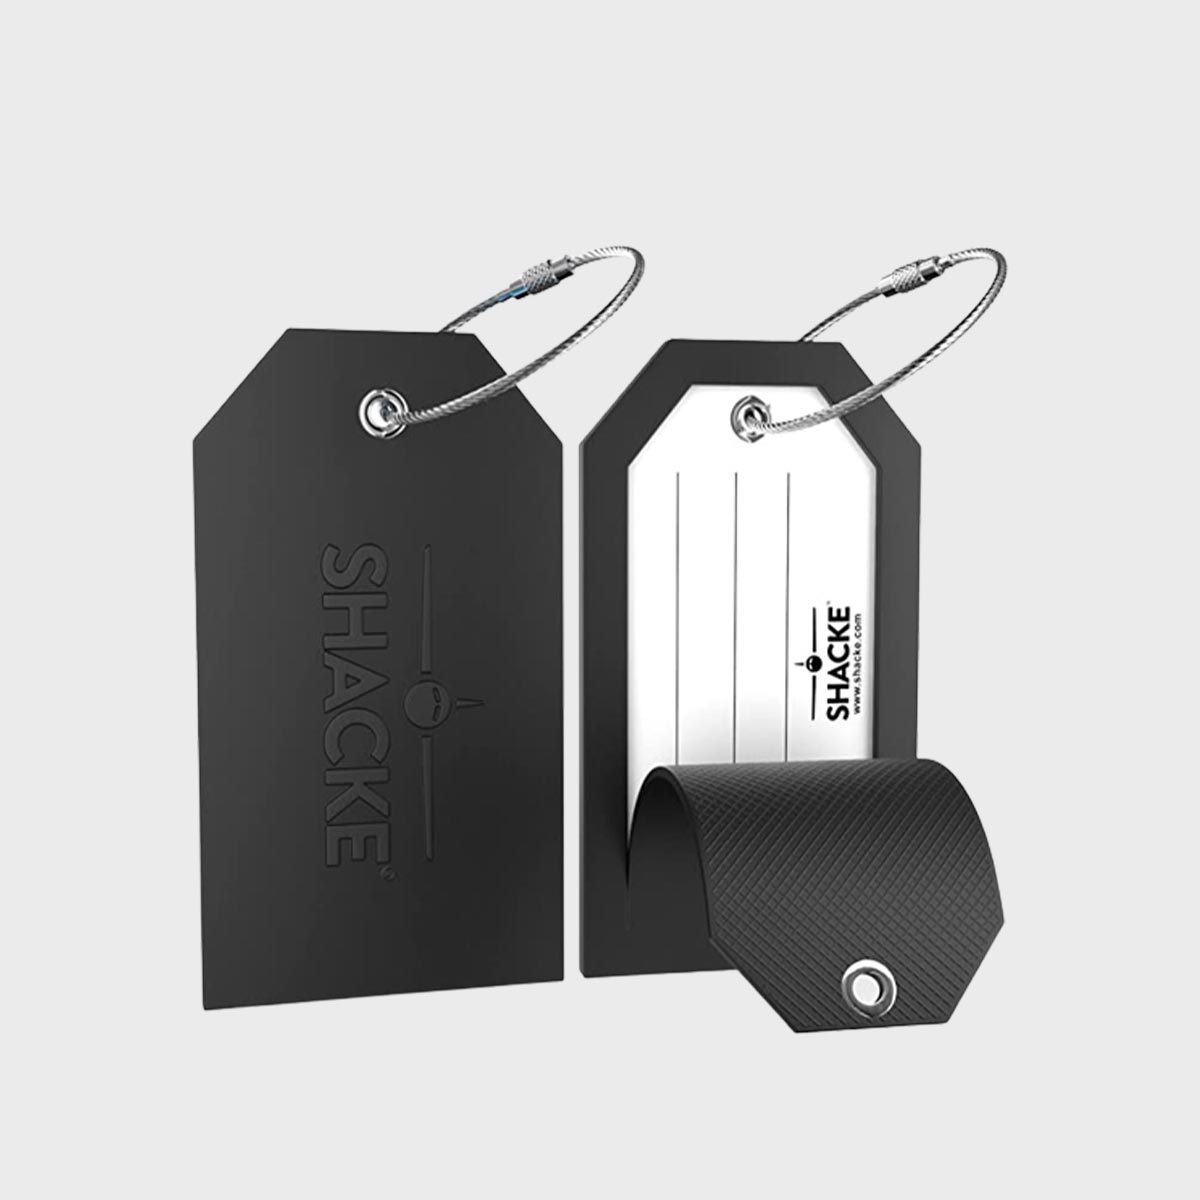 <p><a href="https://www.amazon.com/Shacke-Luggage-Privacy-Cover-Steel/dp/B019JK41F6" rel="noopener">Shacke Privacy Tags</a> are designed by travelers, for travelers. Stainless steel loops are as tough as they sound. These must-have <a href="https://www.rd.com/list/amazon-travel-accessories/">Amazon travel accessories</a> won't be ripped off your luggage, and the PVC rubber keeps personal information safe from the environment and prying eyes.</p> <p class="listicle-page__cta-button-shop"><a class="shop-btn" href="https://www.amazon.com/Shacke-Luggage-Privacy-Cover-Steel/dp/B019JK41F6">Shop Now</a></p>